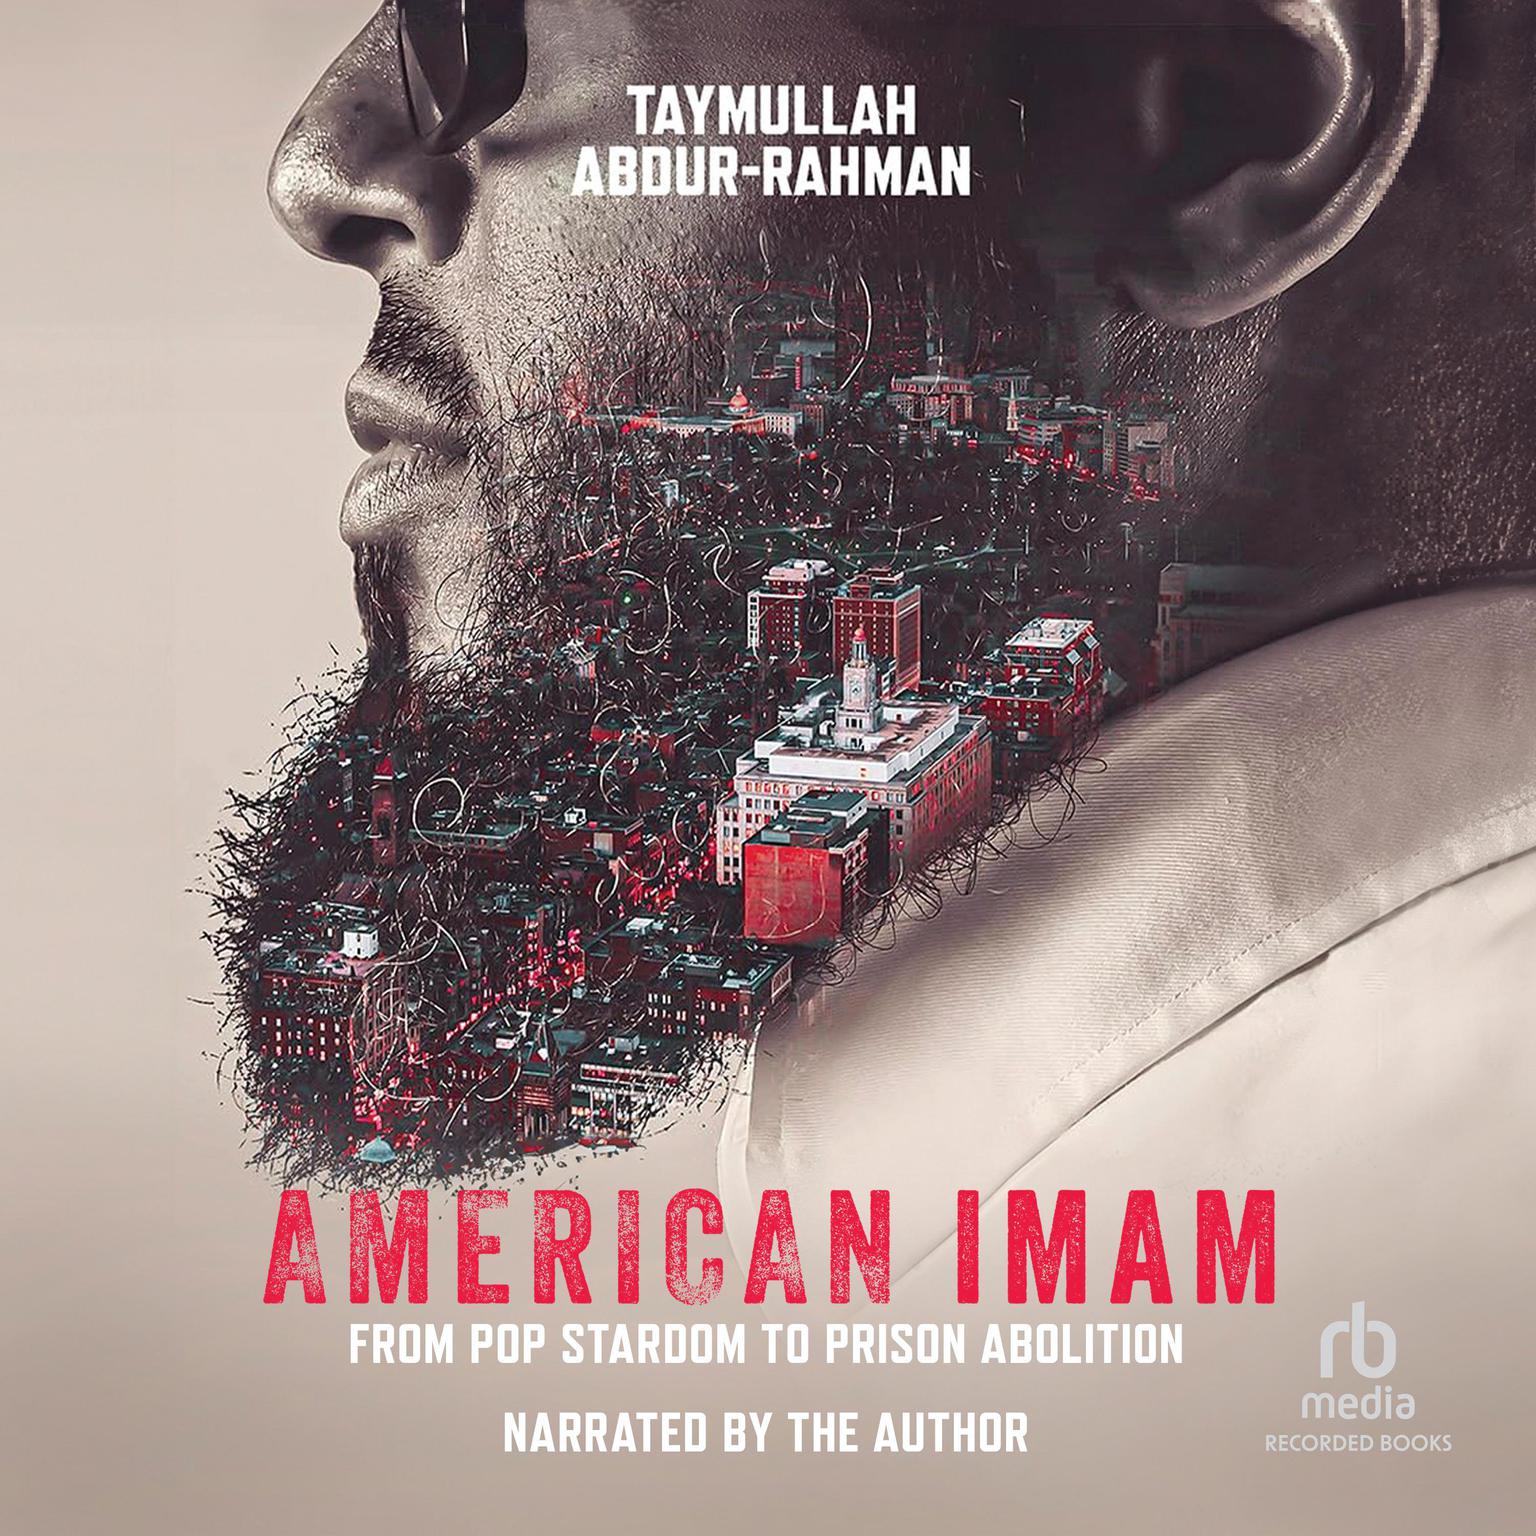 American Imam: From Pop Stardom to Prison Abolition Audiobook, by Taymullah Abdur Rahman